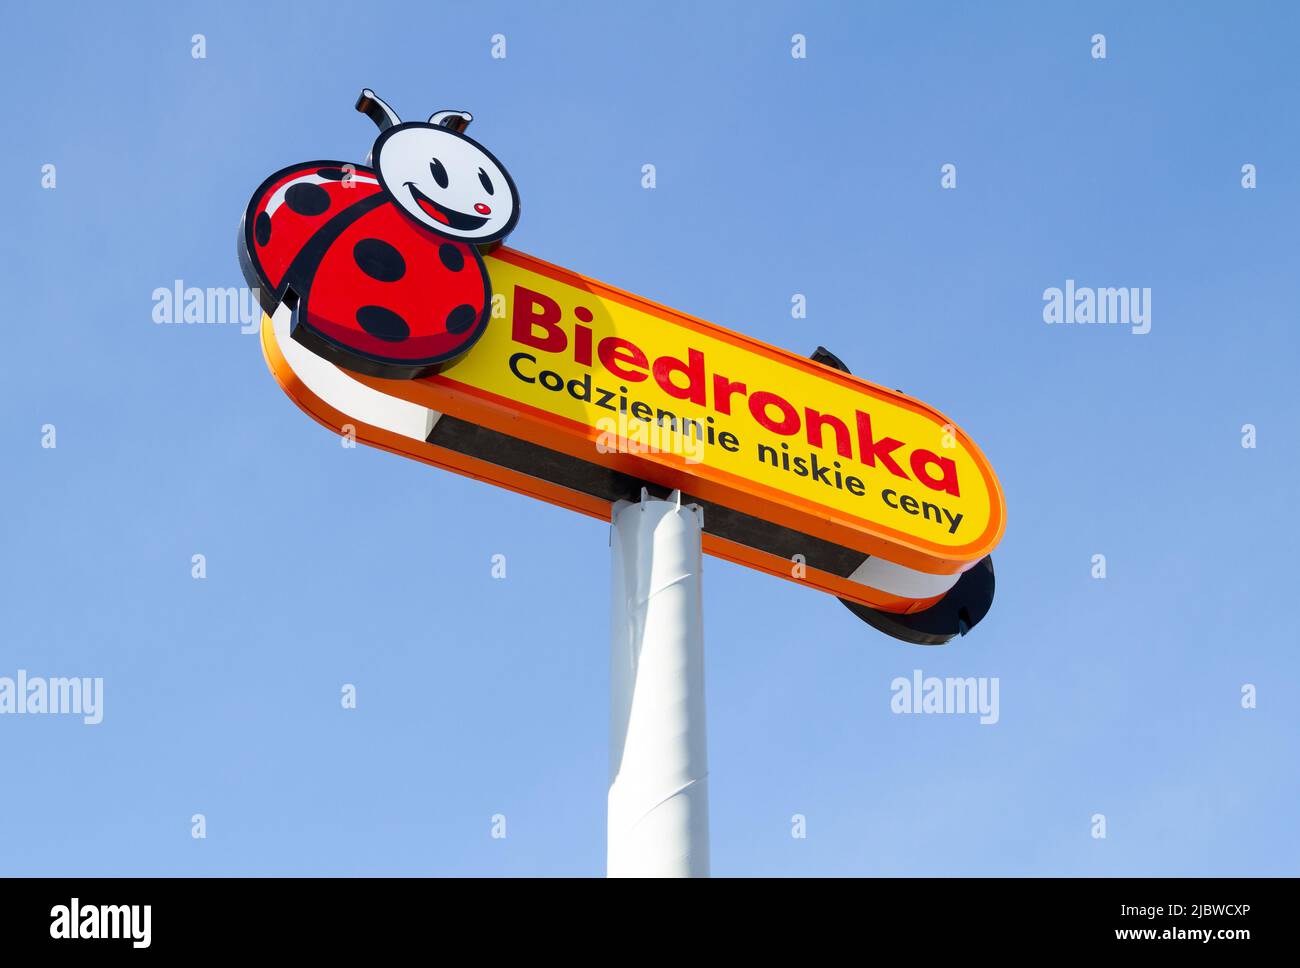 Biedronka is a retail chain of discount shops in Poland. Convenience grocery store, Polish shopping center. Signboard with brand logotype. Stock Photo